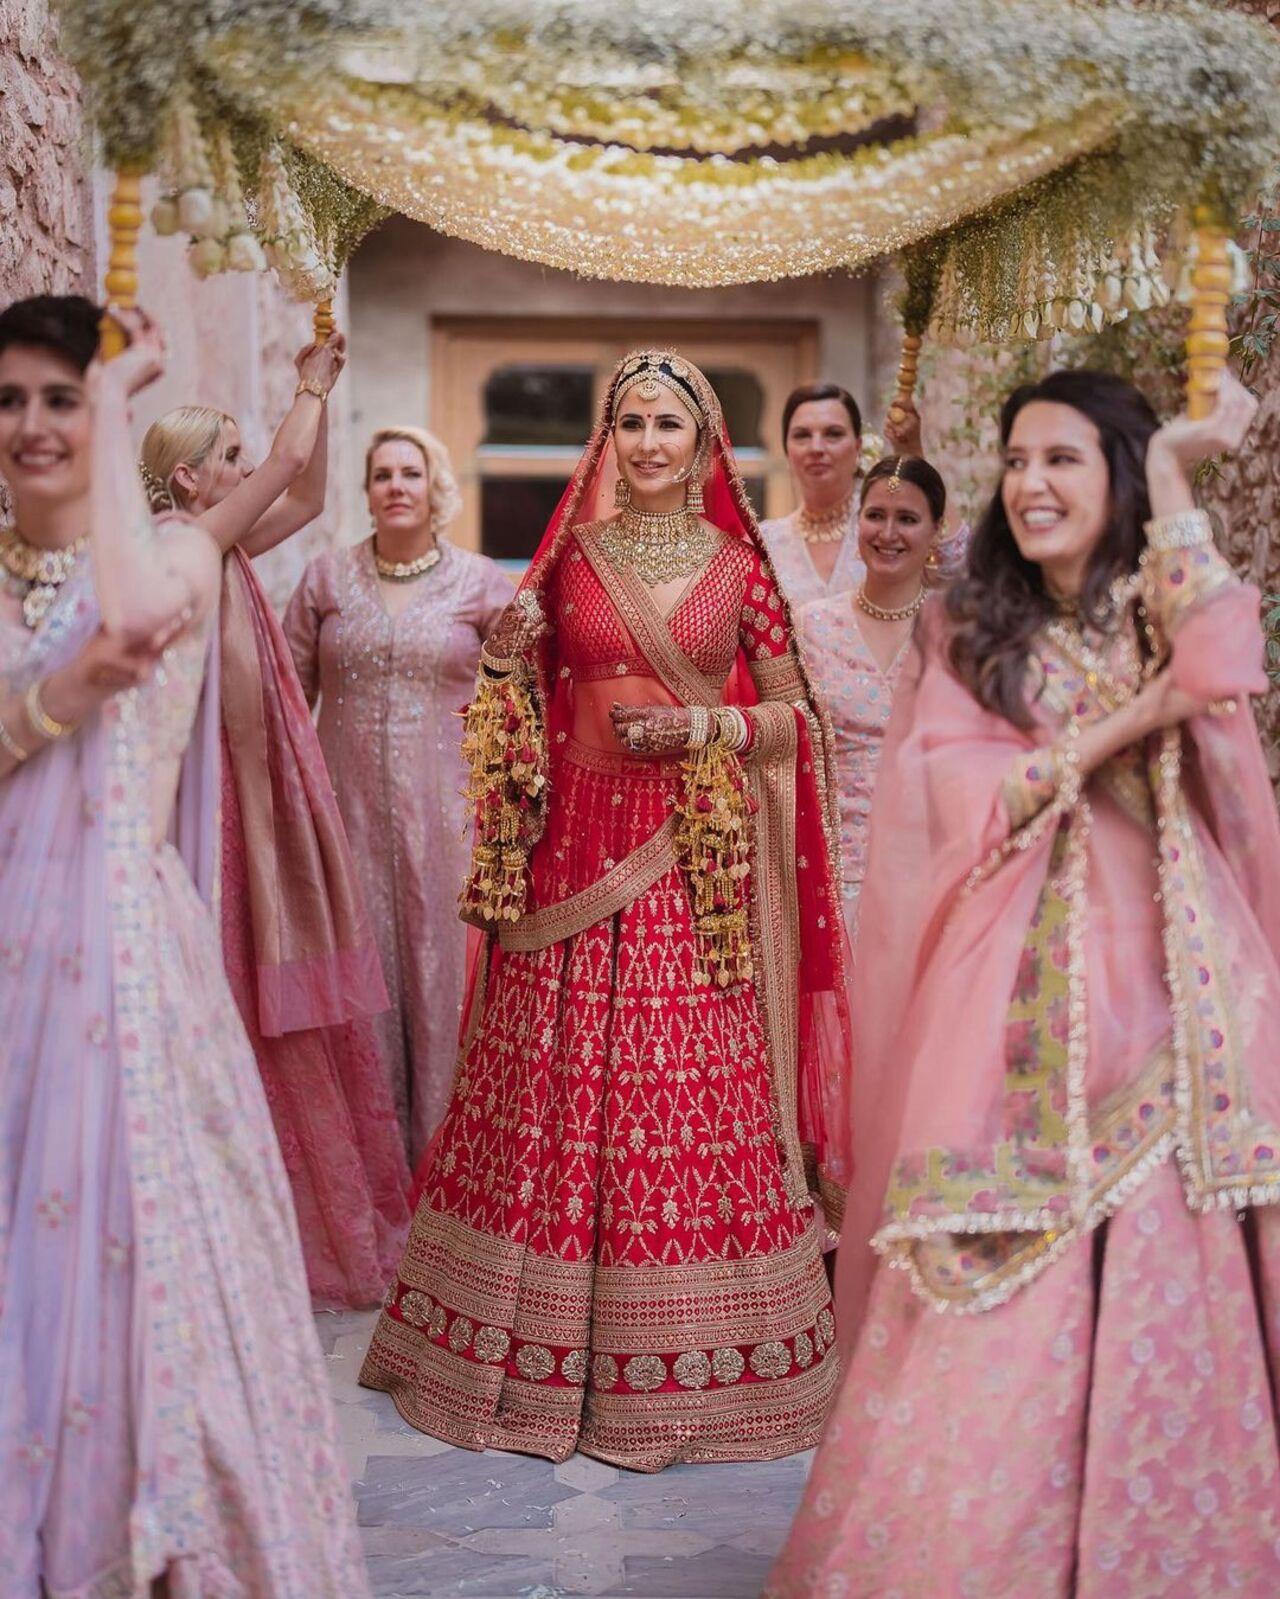 Katrina Kaif's sisters and brothers participated in rituals at her big-fat Punjabi wedding in December 2021